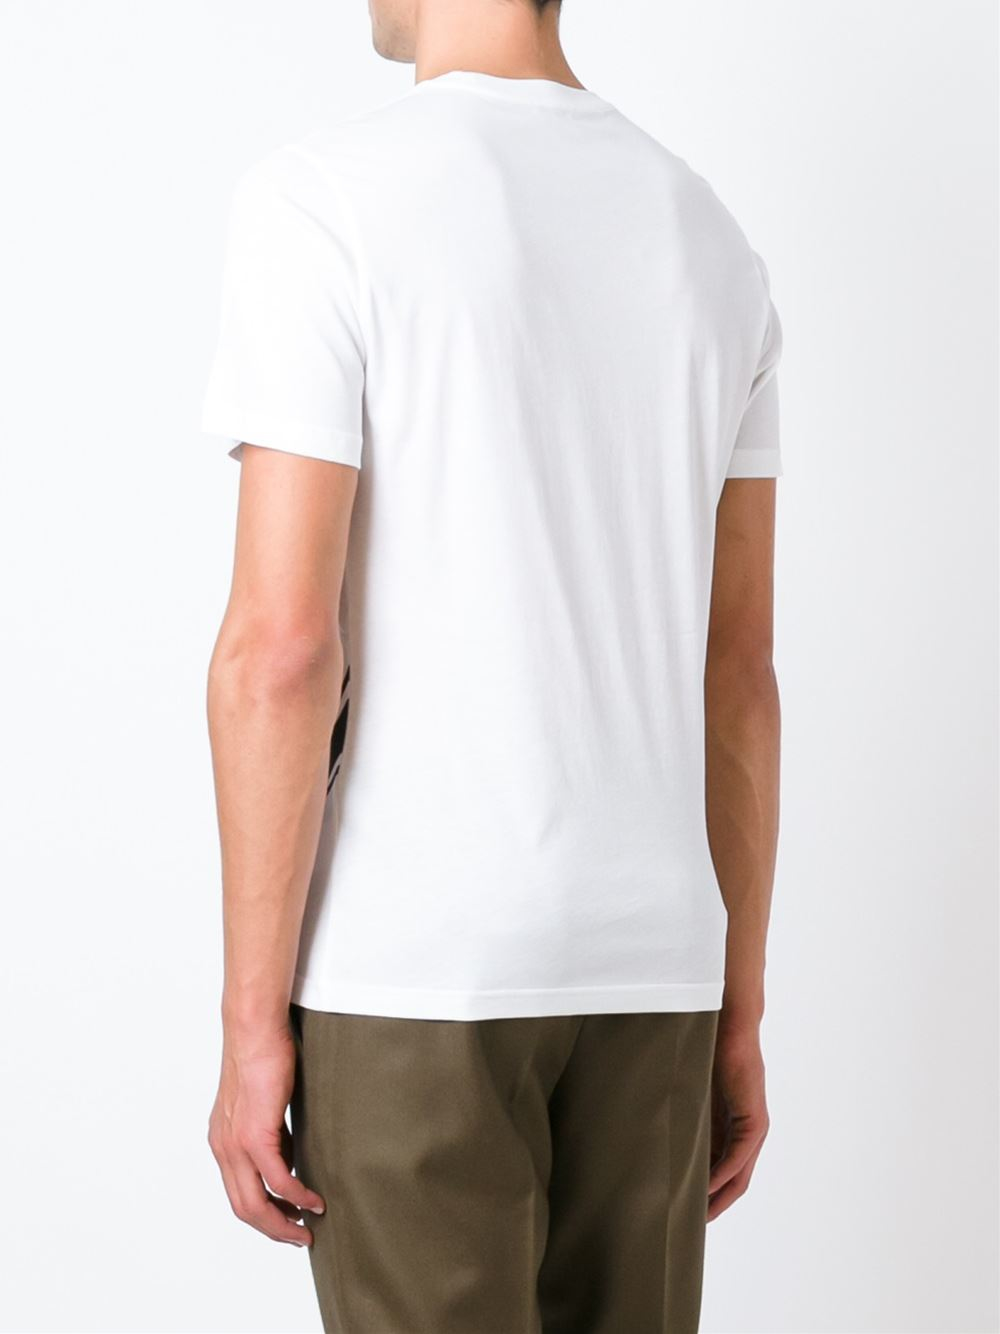 Lyst - Vivienne Westwood 'i Am Expensive' T-shirt in White for Men